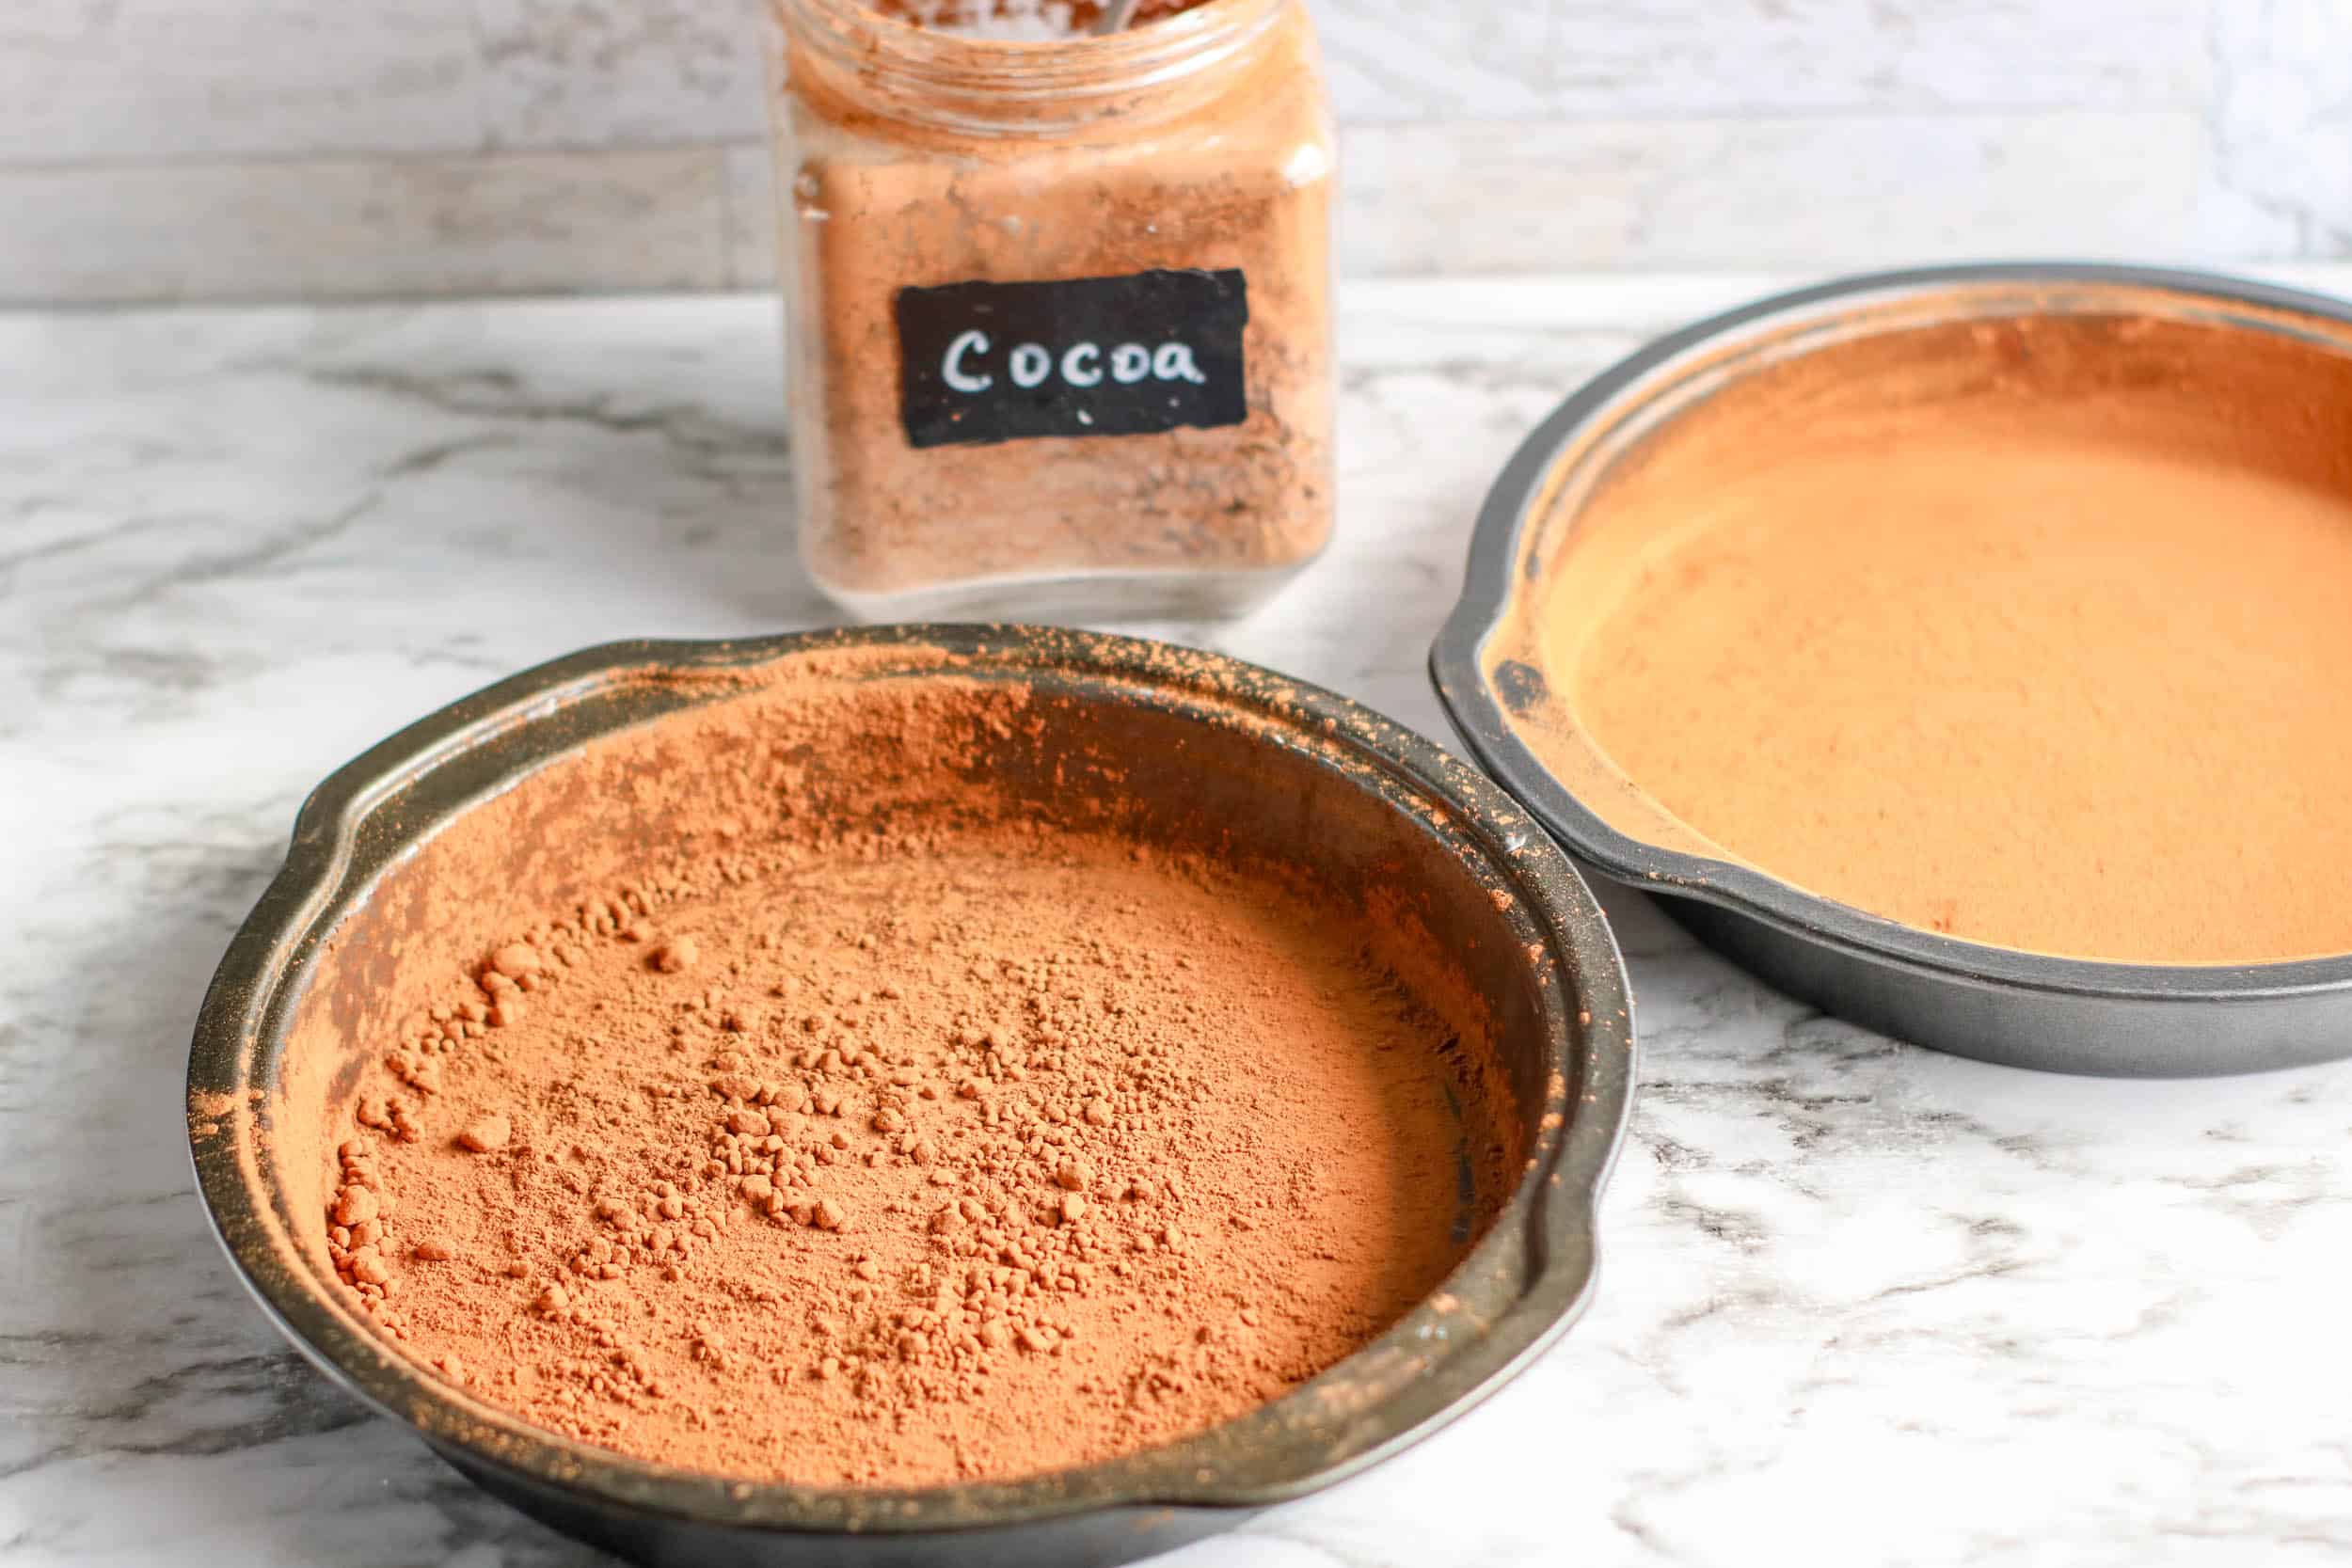 three 9-inch round cake pans by greasing and dusting with cocoa powder.